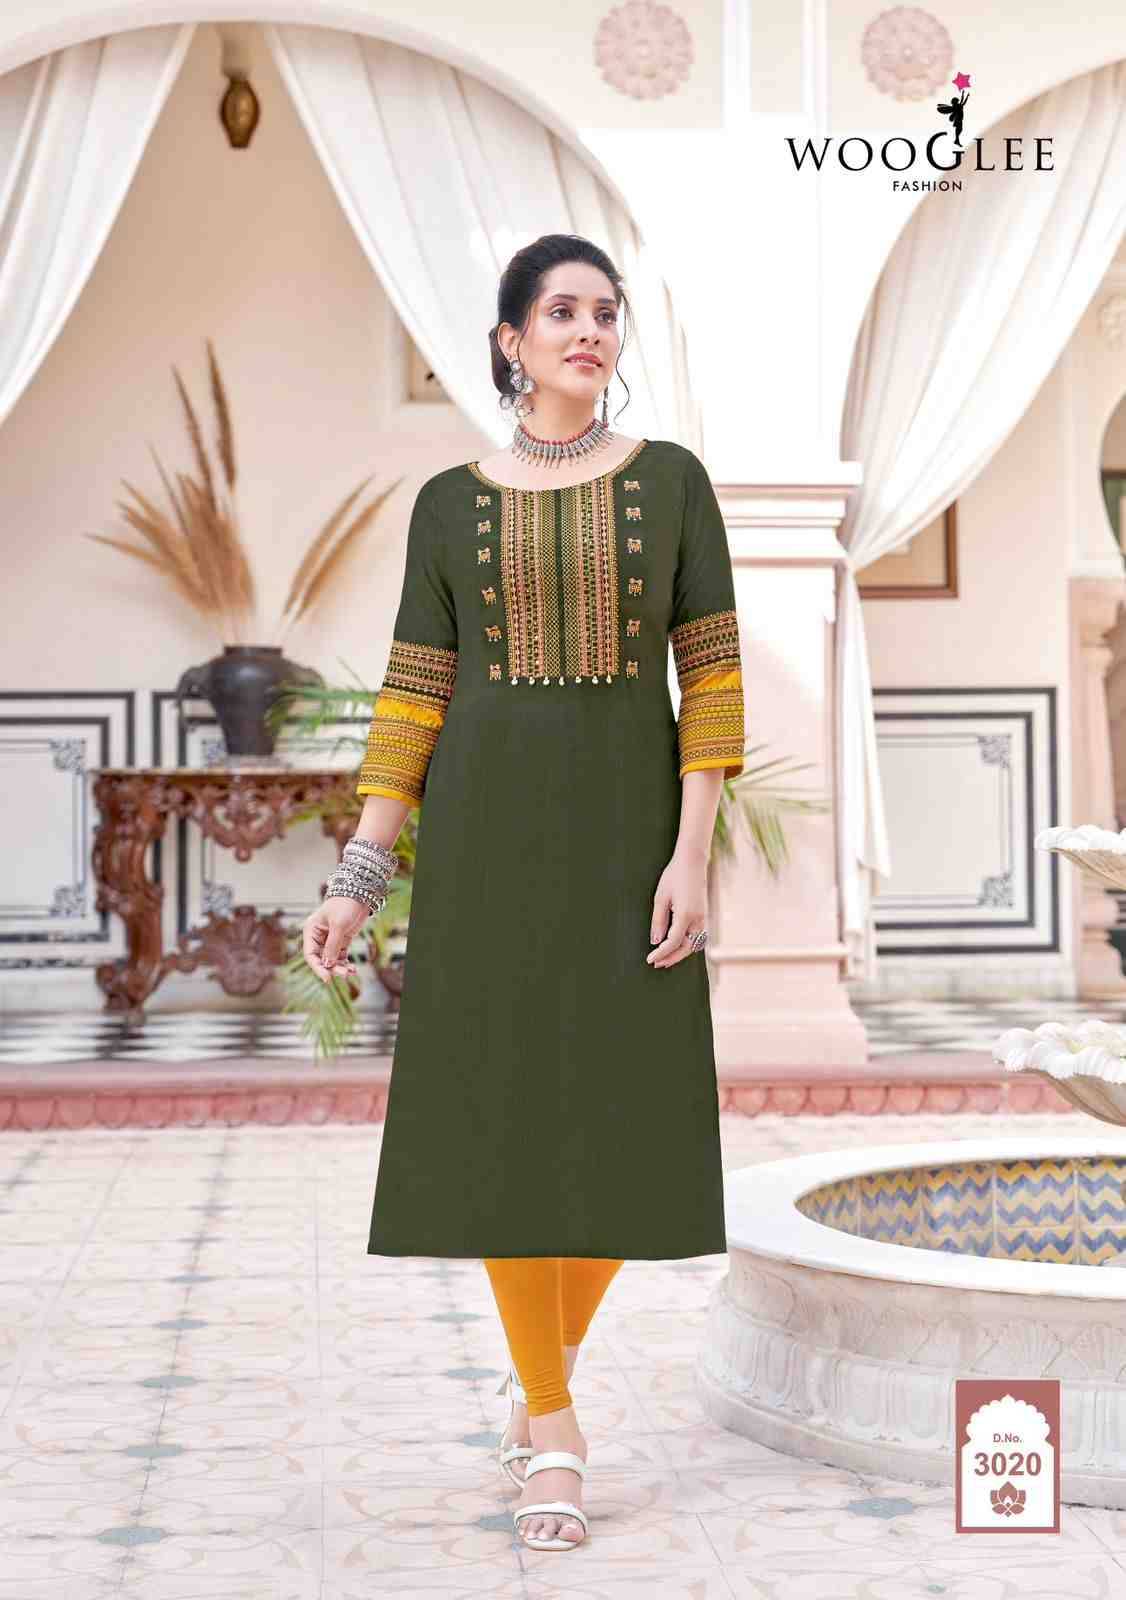 Salonee Vol-5 By Wooglee 3019 To 3024 Series Designer Stylish Fancy Colorful Beautiful Party Wear & Ethnic Wear Collection Heavy Rayon Kurtis At Wholesale Price